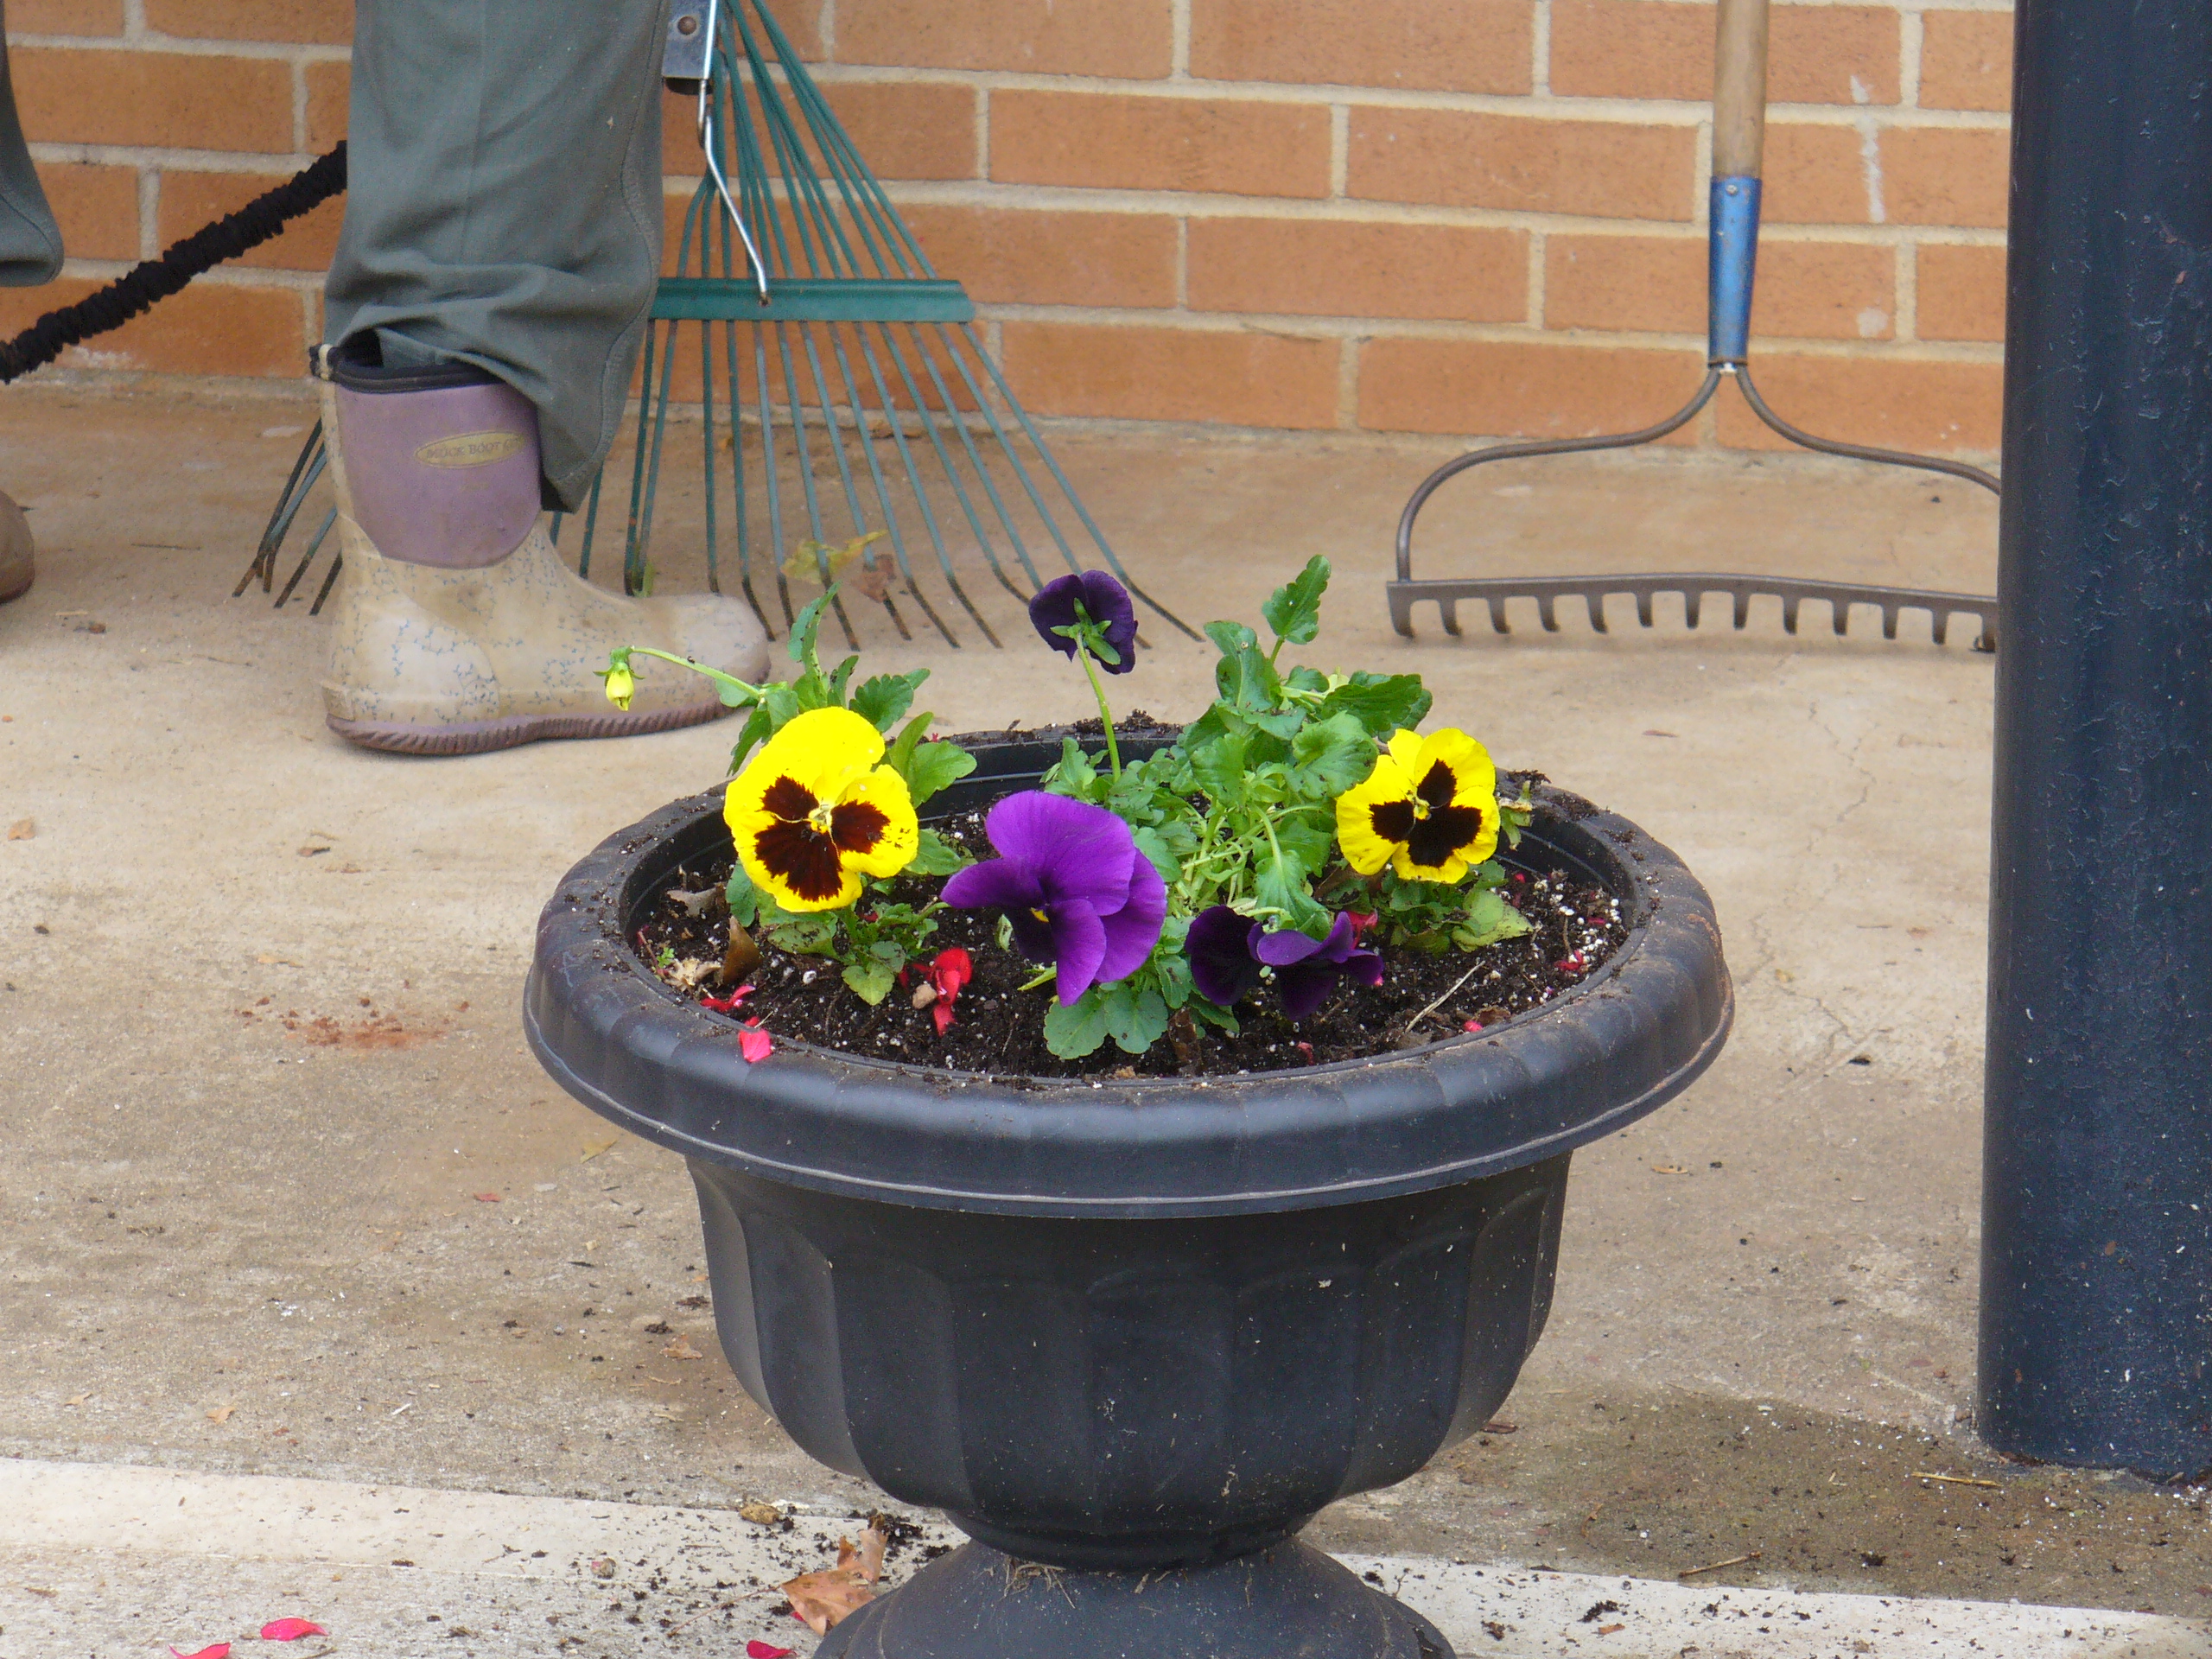 Potted purple and yellow pansies